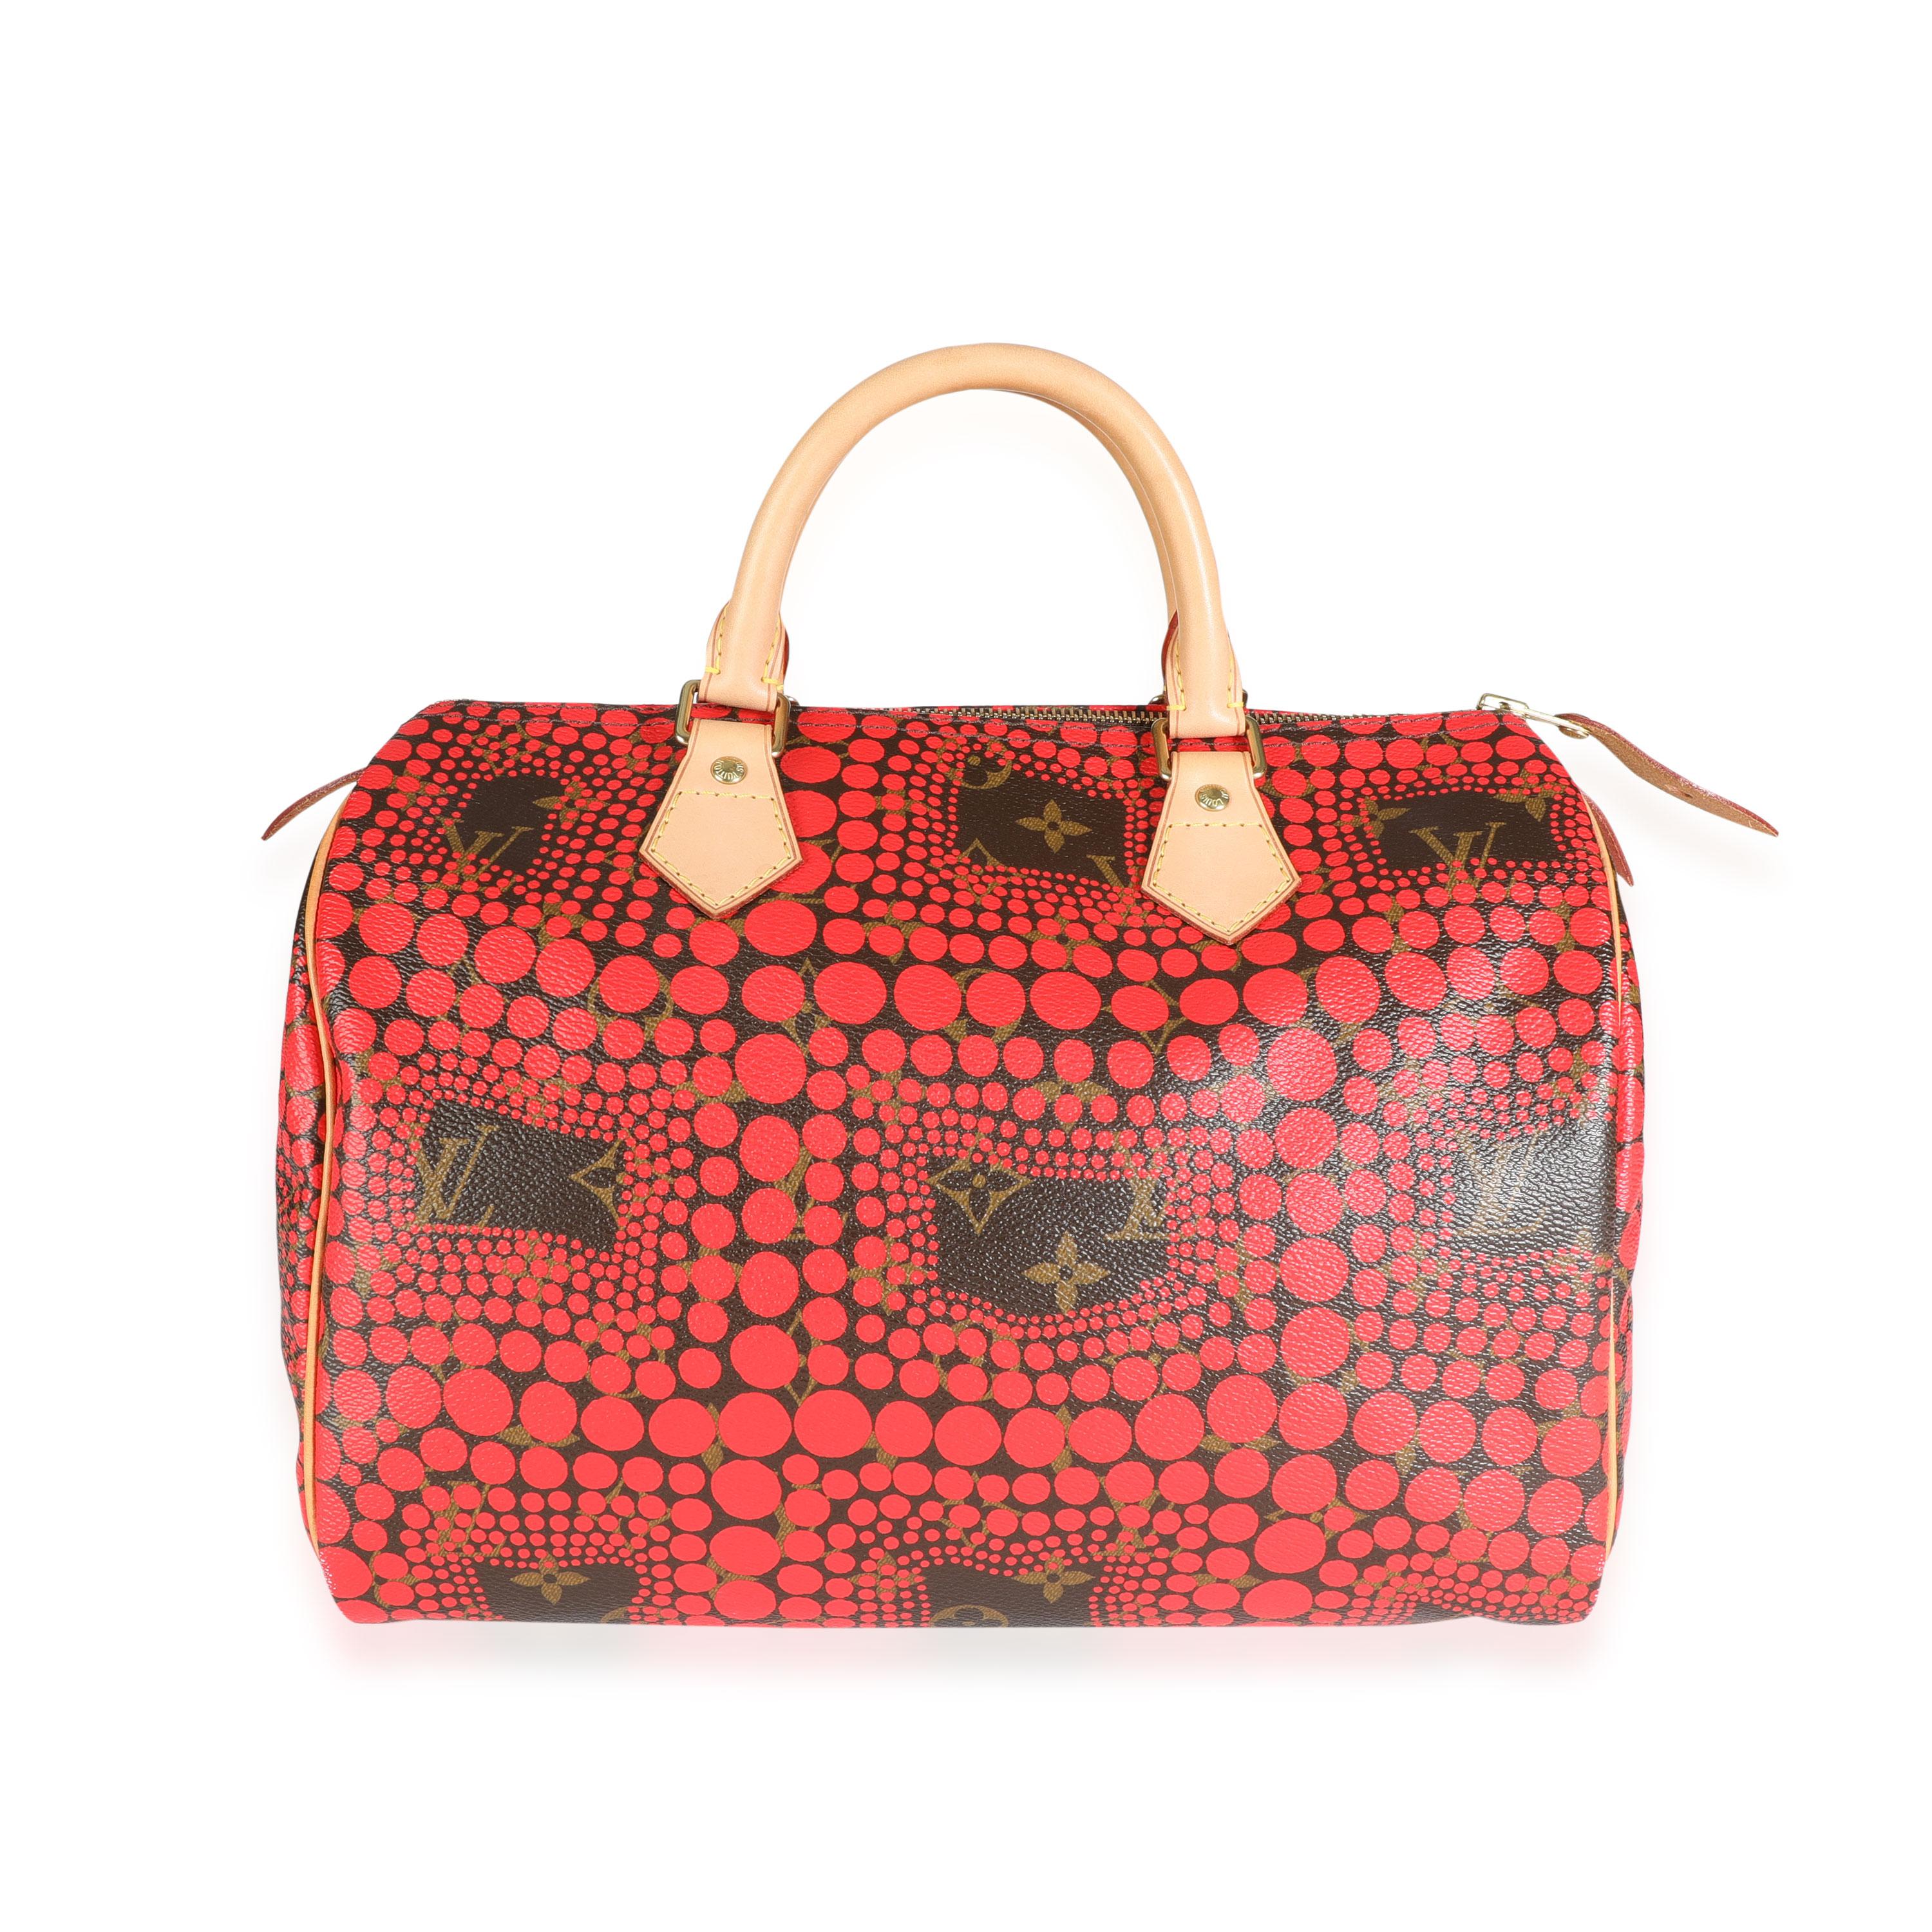 Listing Title: Louis Vuitton x Yayoi Kusama Red Infinity Dots Monogram Canvas Speedy 30
SKU: 117939
Condition: Pre-owned (3000)
Handbag Condition: Very Good
Condition Comments: Very Good Condition. Wear to corners. Faint discoloration and patina to